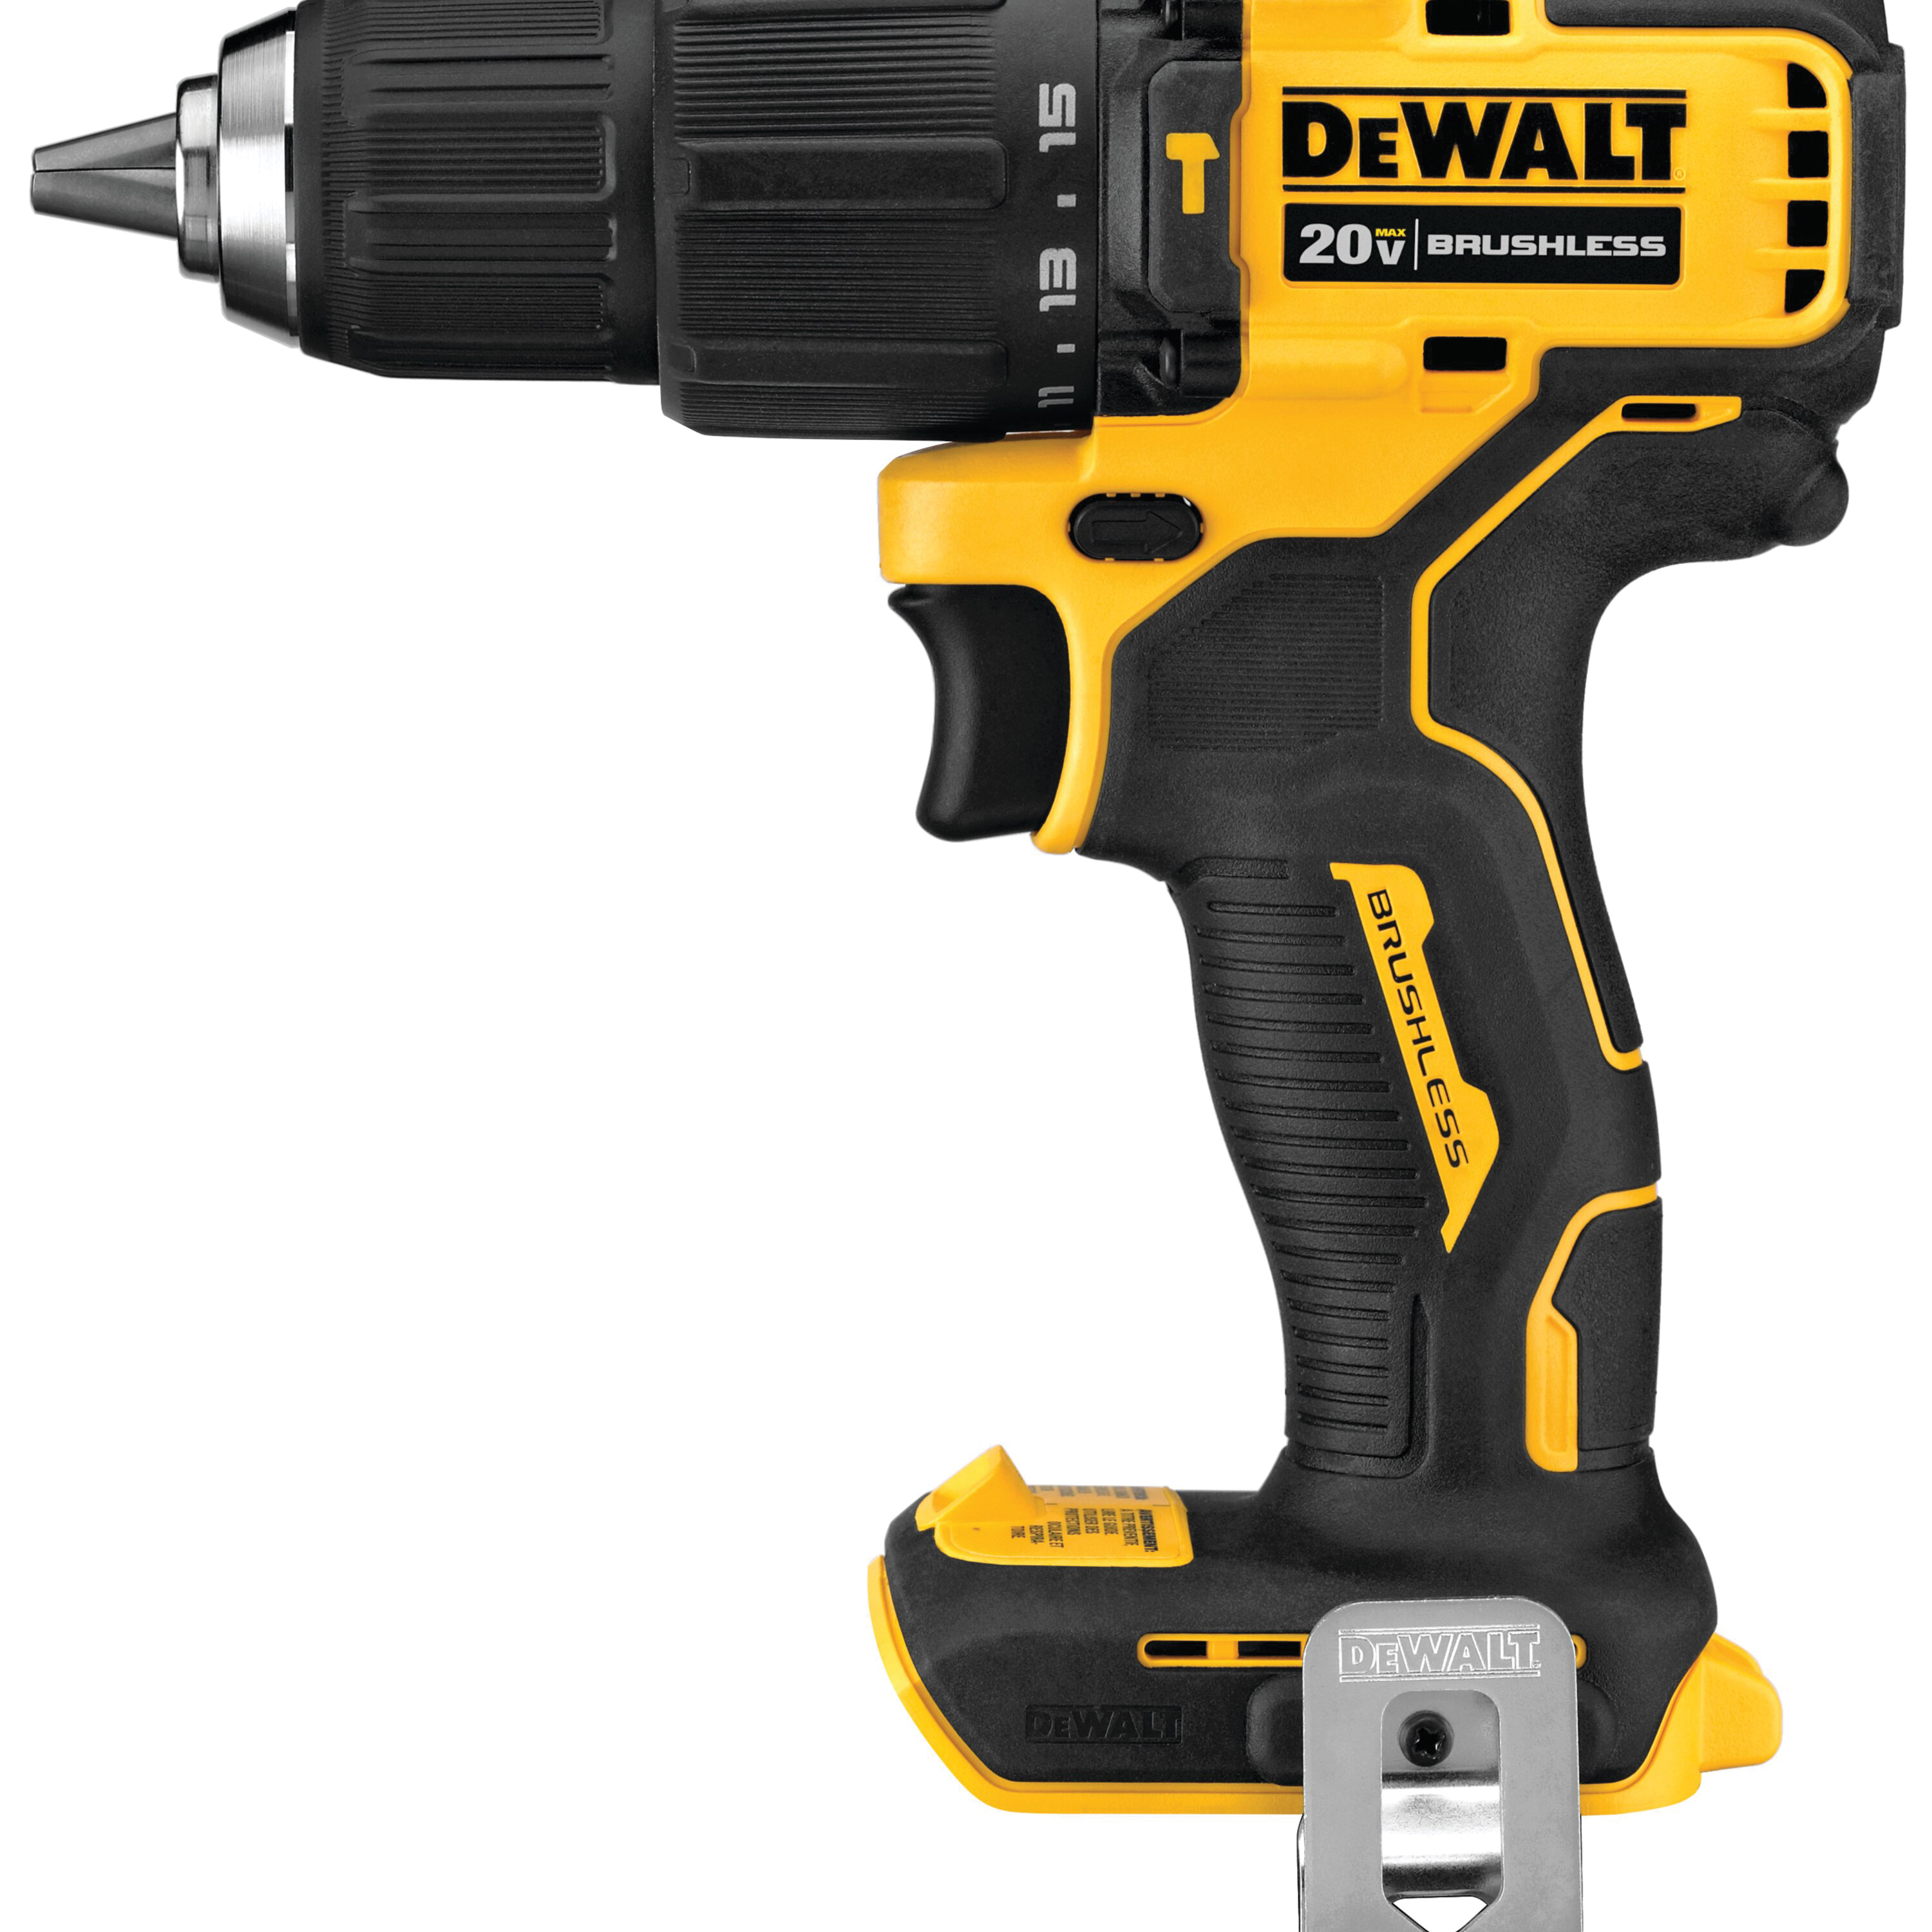 ATOMIC DCD709B Cordless Compact Hammer Drill/Driver, Tool Only, 20 V, 1/2 in Chuck, Ratcheting Chuck